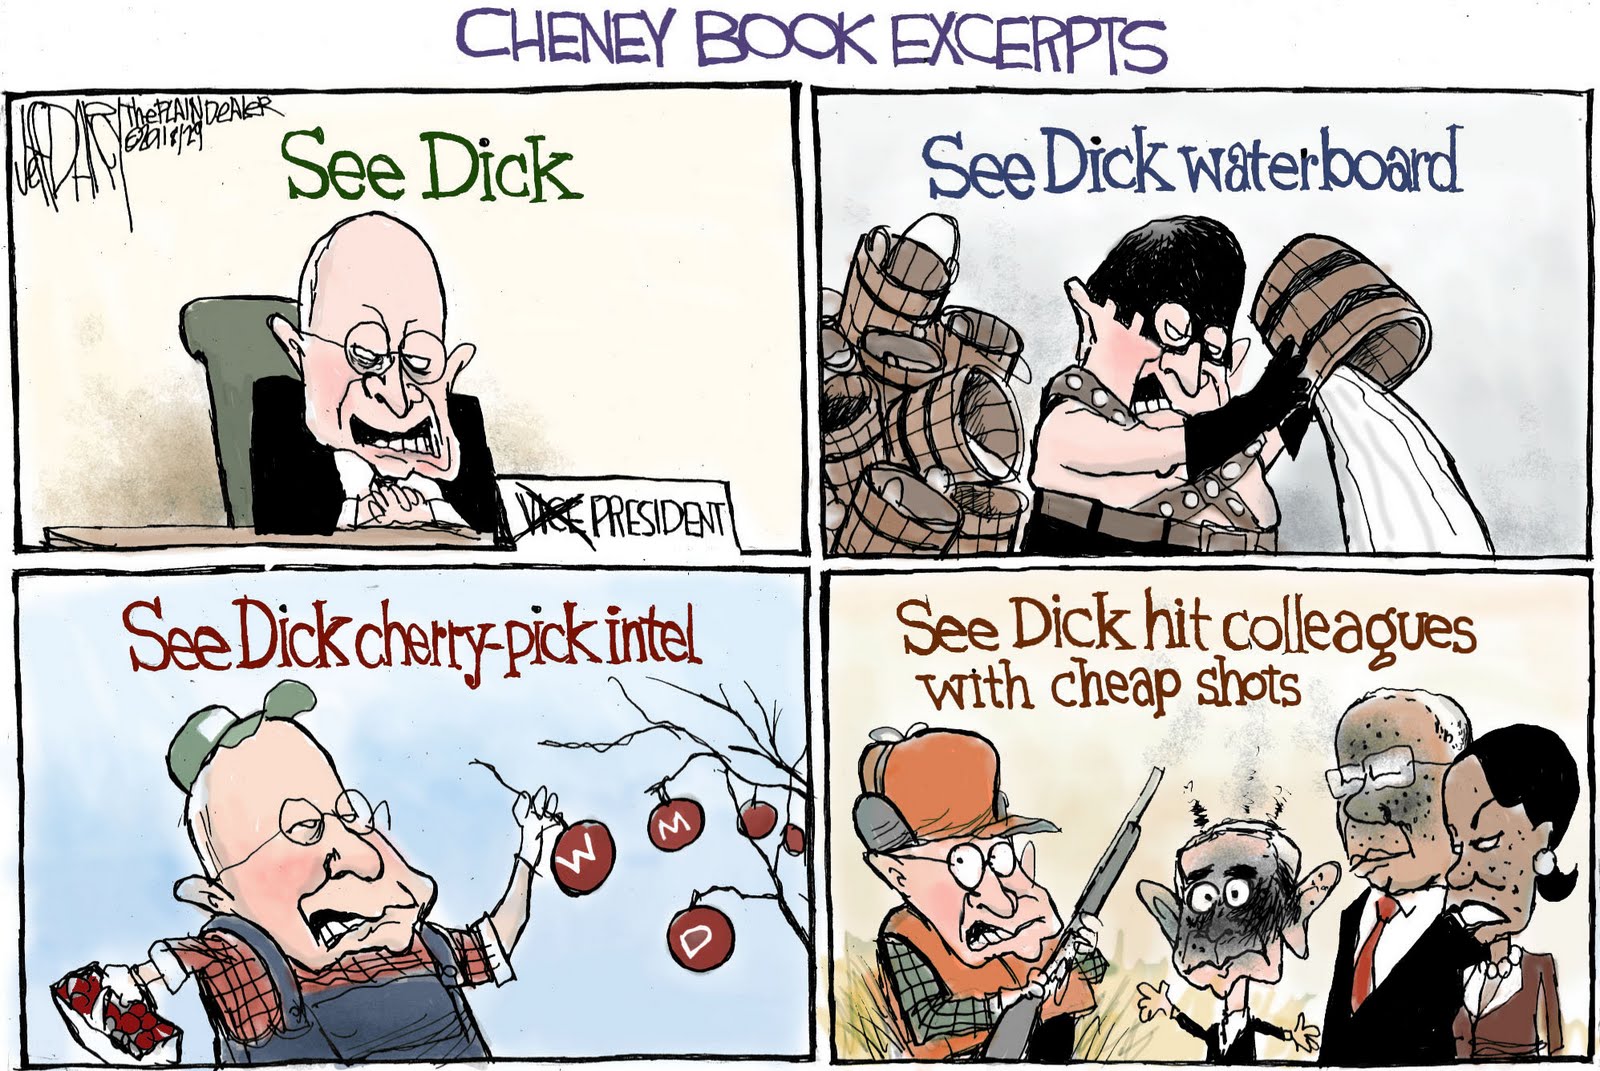 Dick cheney pacemaker